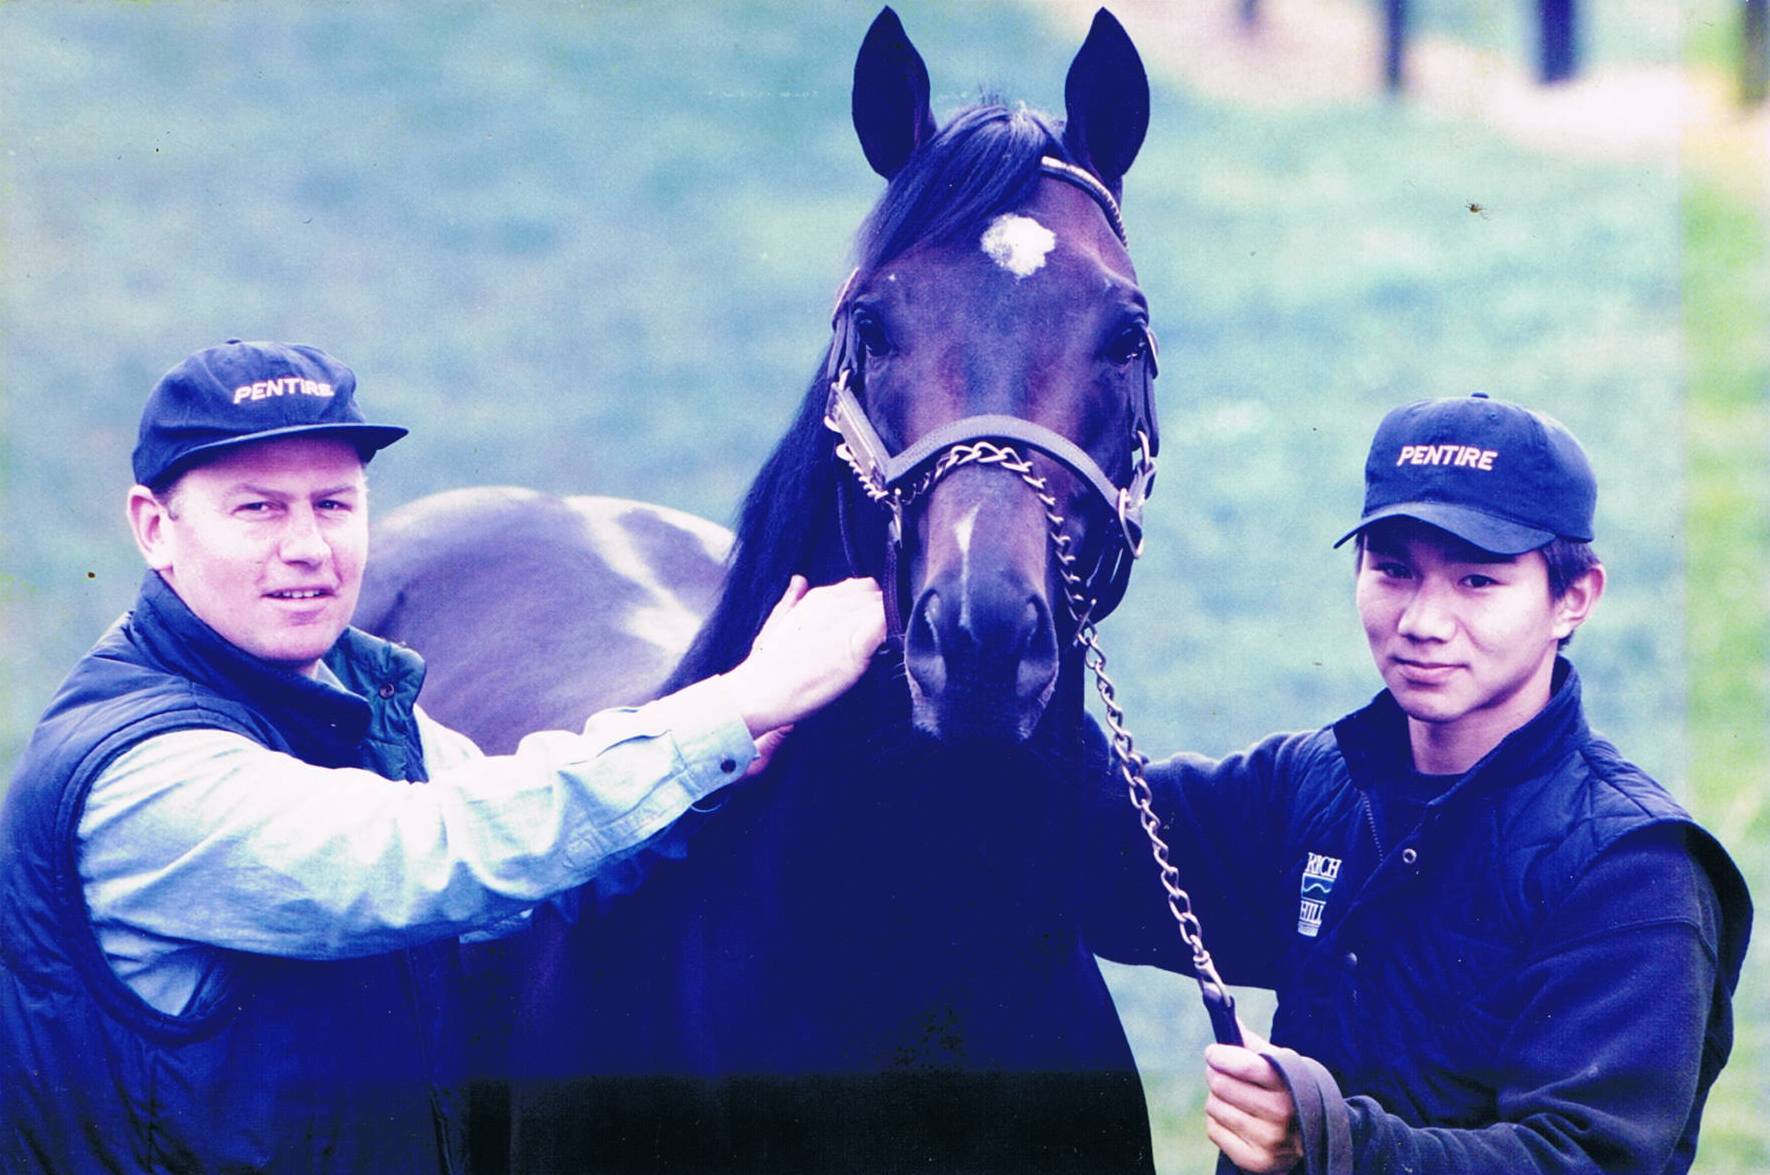 John Thompson with Pentire and Japanese groom Naoki Sakota soon after the stallion’s arrival at Rich Hill Stud